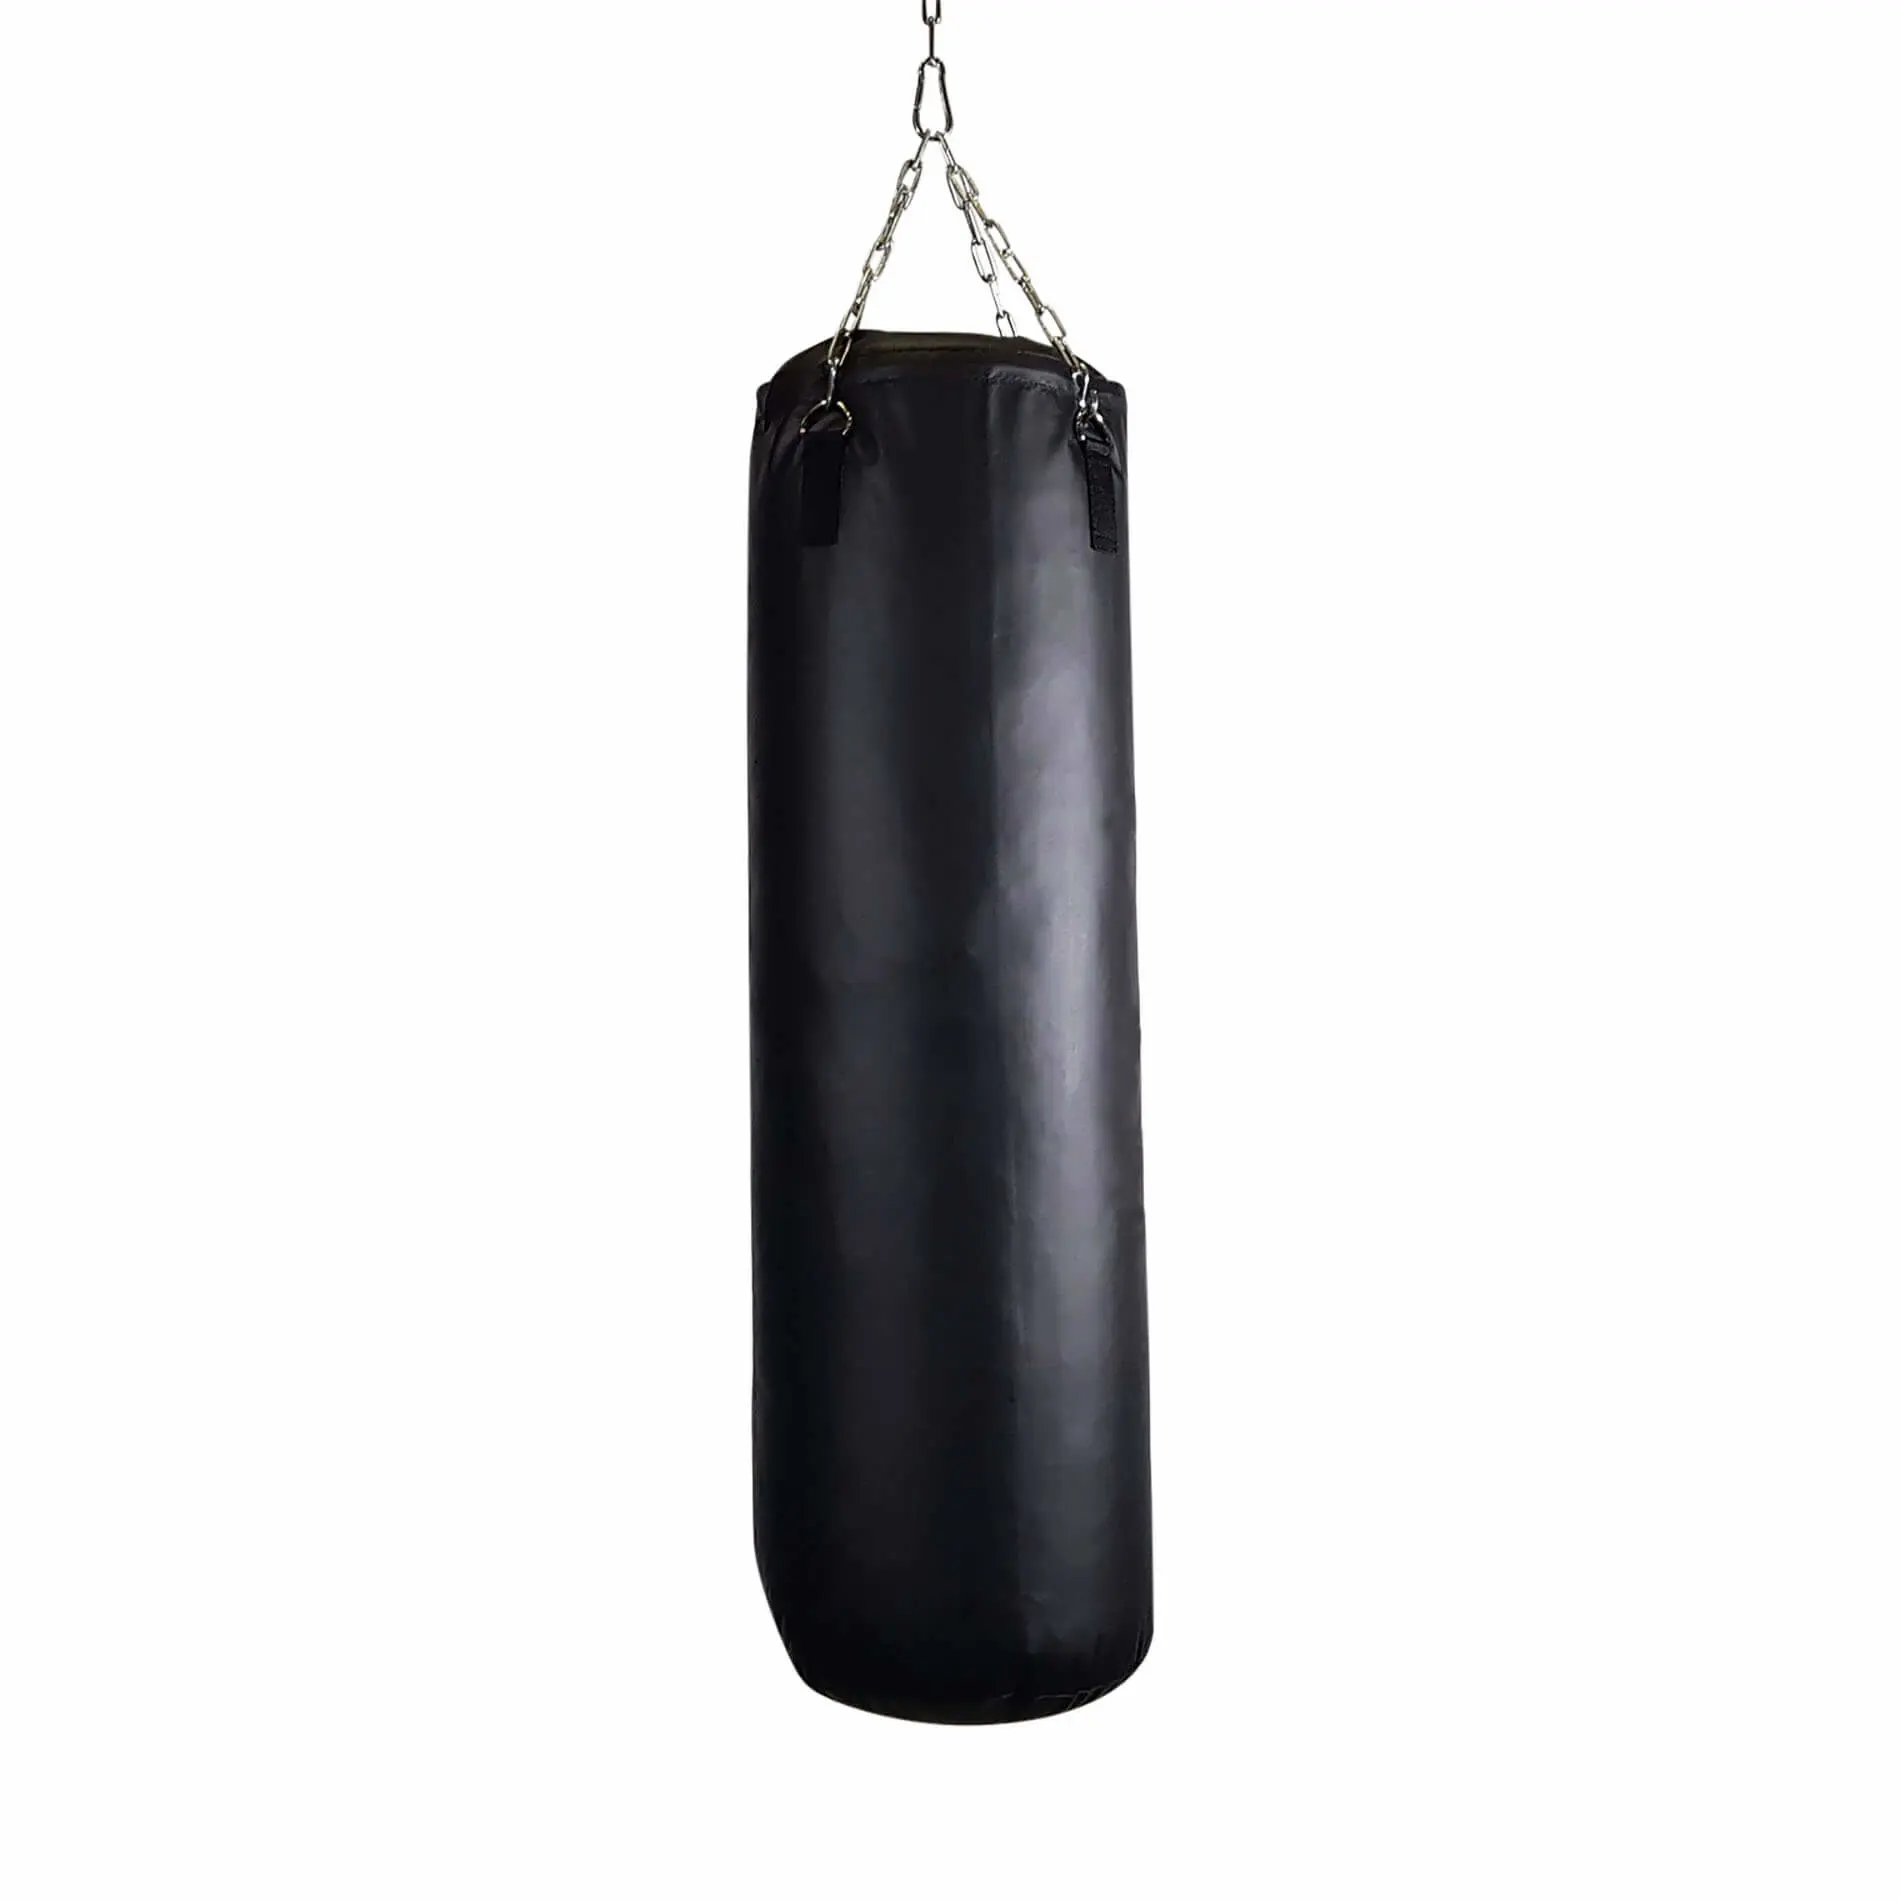 UNFILLED Silat Punching Bag Boxing Bag for Kick Boxing MMA Muay Thai Martial Arts Training Punching with Hanging Chain 100cm